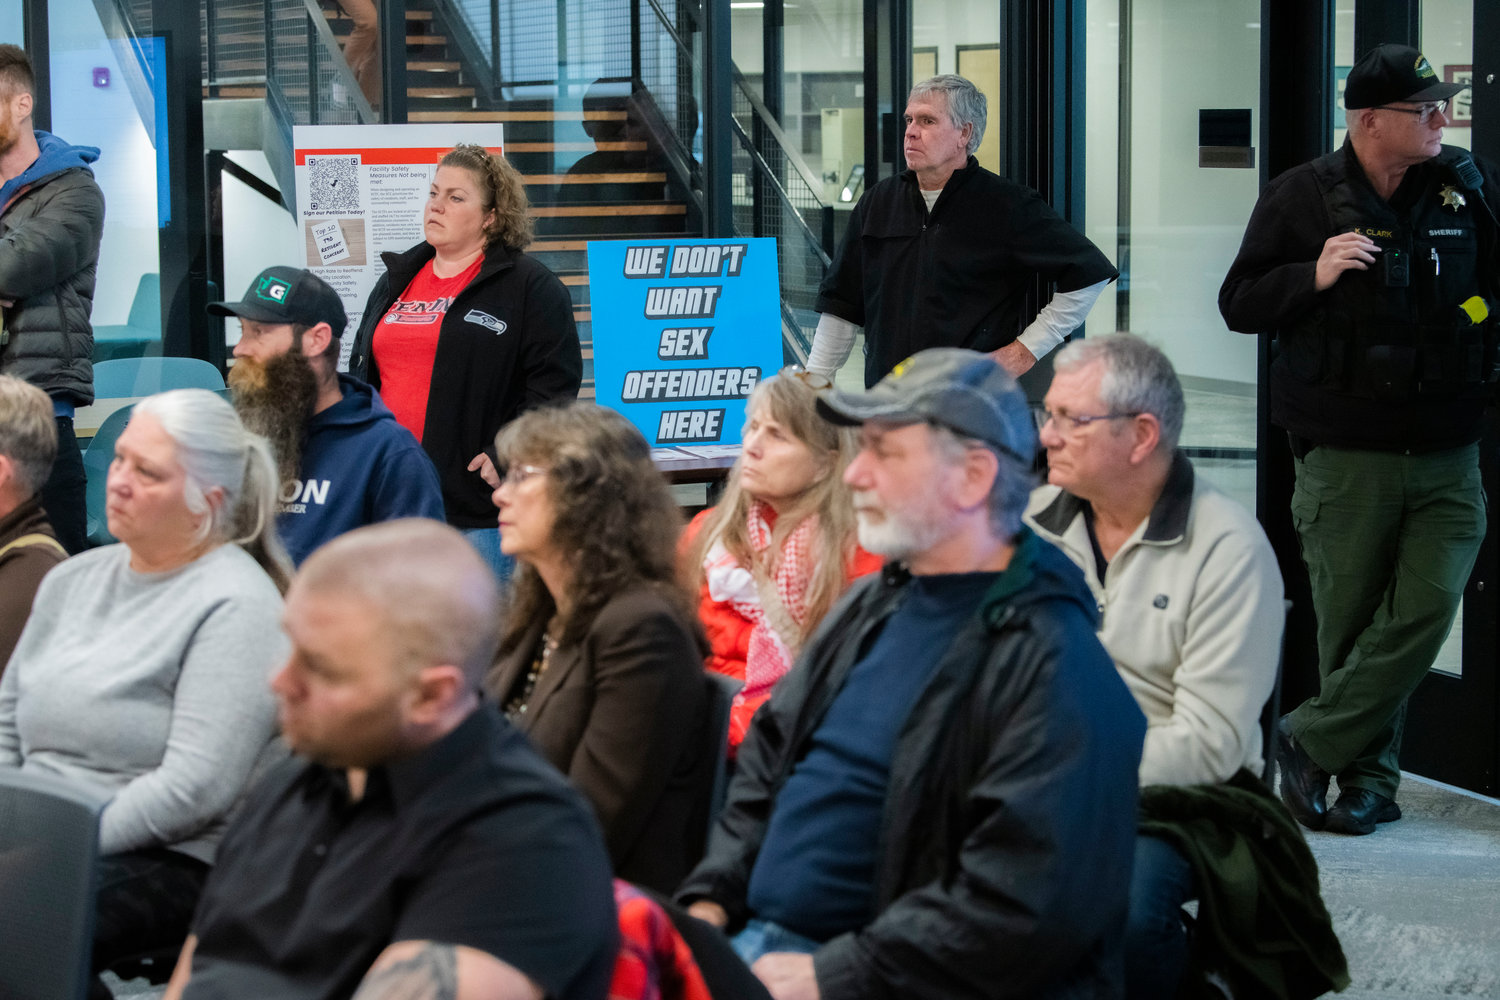 Tenino residents speak out in opposition of the Supreme Living facility located at 2813 140th Avenue Southwest in Tenino during a meeting with Thurston County Commissioners in Olympia on Tuesday.